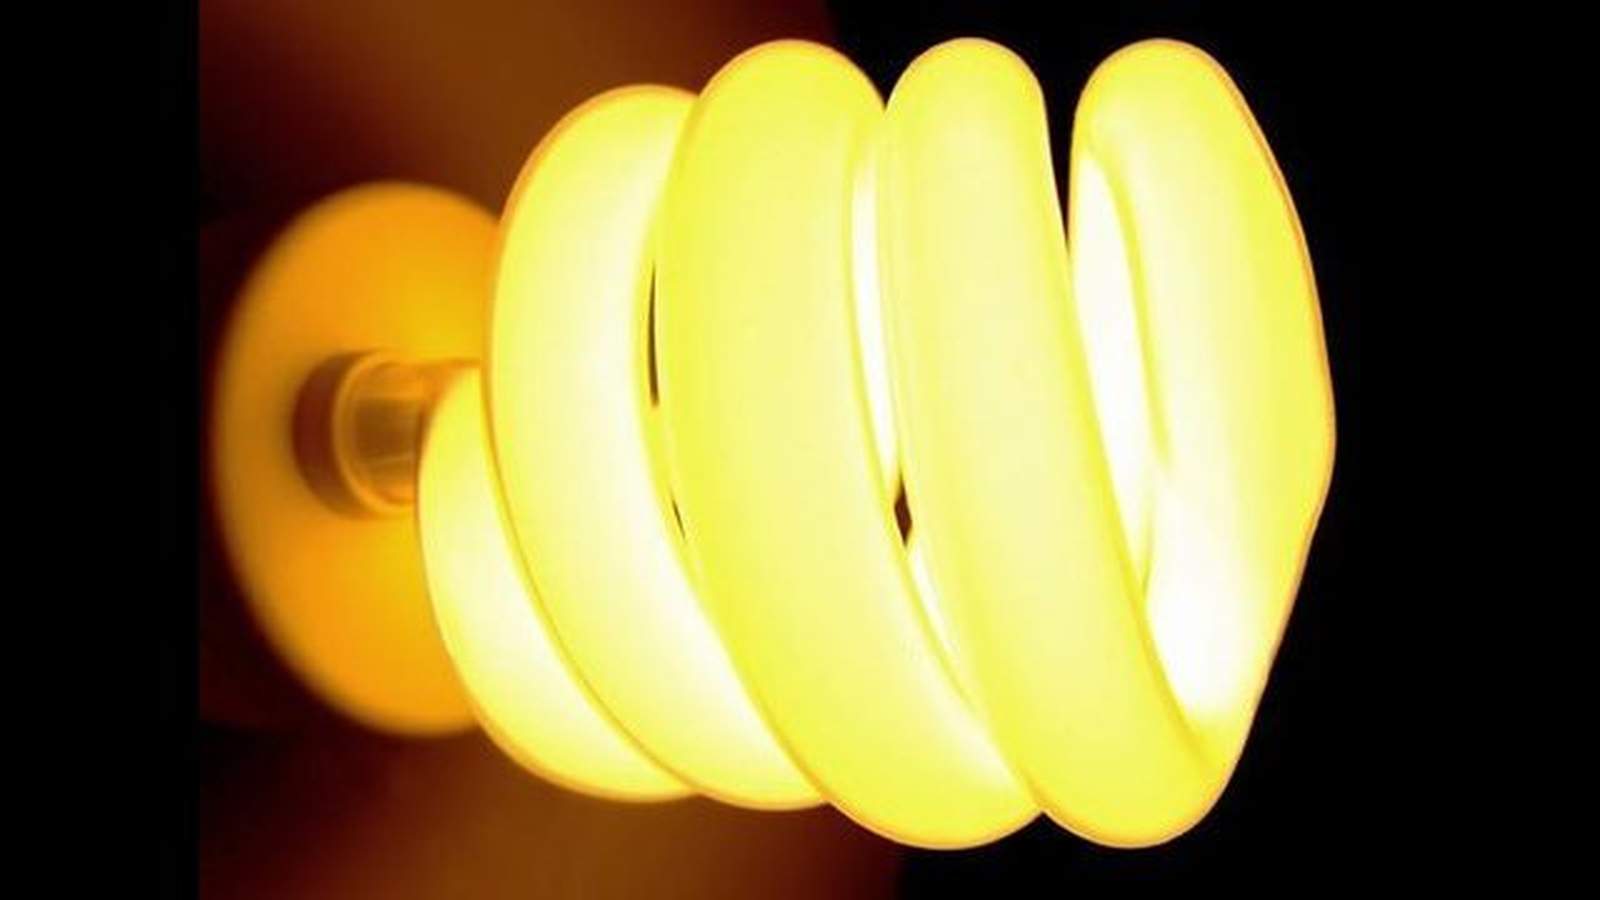 Consumer advocates say this one change could help electric customers